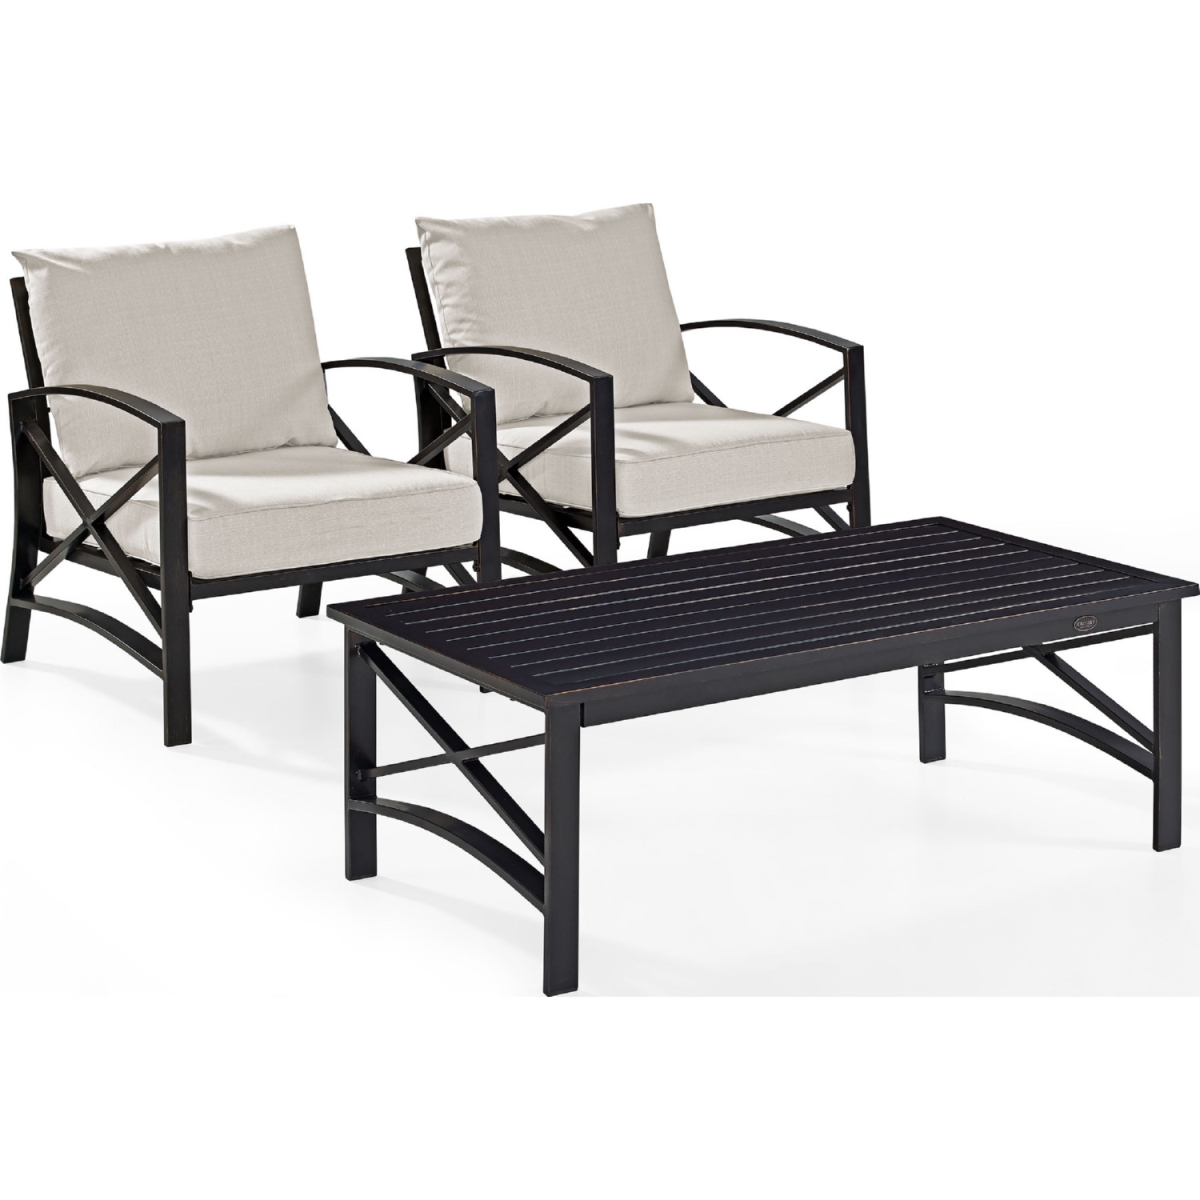 Ko60012bz-ol 3 Piece Kaplan Outdoor Seating Set With Oatmeal Cushion - Two Kaplan Outdoor Chairs, Coffee Table